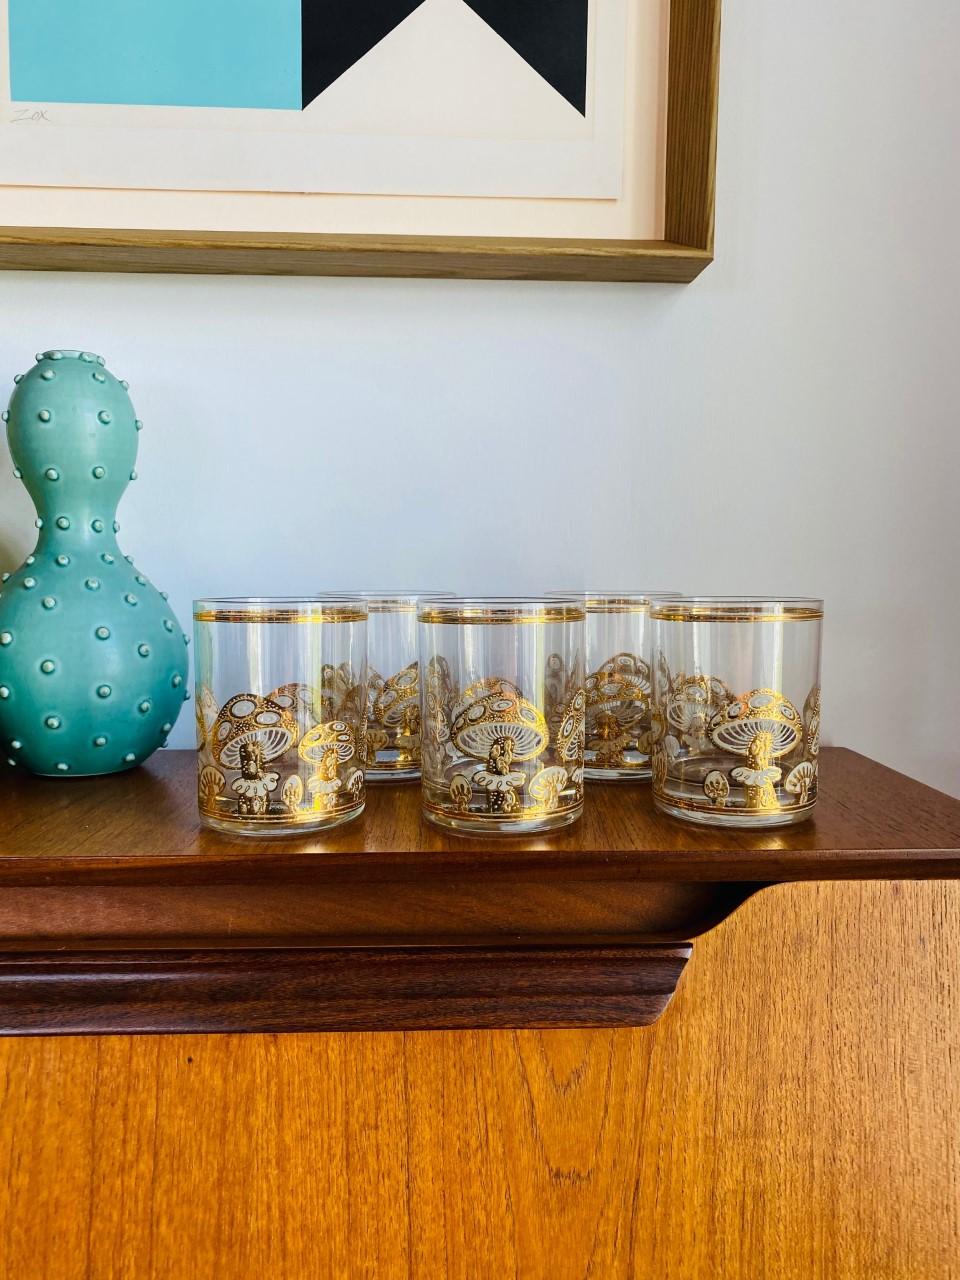 Culver Ltd 22k Gold Mushroom Glasses - Set of 5 In Good Condition For Sale In San Diego, CA